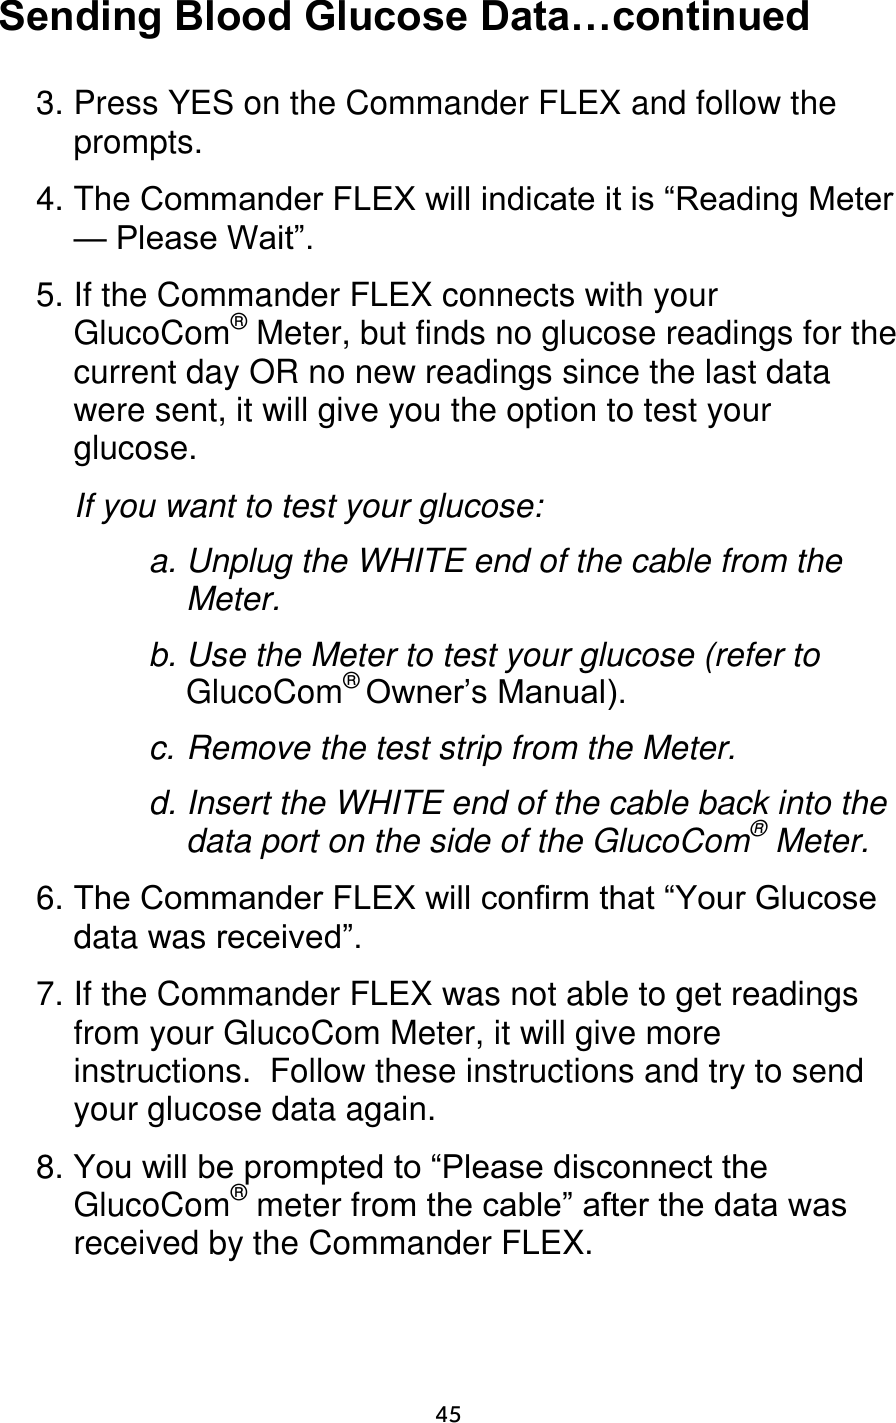                      45 Sending Blood Glucose Data…continued  3. Press YES on the Commander FLEX and follow the prompts.  4. The Commander FLEX will indicate it is “Reading Meter — Please Wait”.  5. If the Commander FLEX connects with your GlucoCom® Meter, but finds no glucose readings for the current day OR no new readings since the last data were sent, it will give you the option to test your glucose.   If you want to test your glucose:  a. Unplug the WHITE end of the cable from the Meter. b. Use the Meter to test your glucose (refer to GlucoCom® Owner’s Manual). c. Remove the test strip from the Meter. d. Insert the WHITE end of the cable back into the data port on the side of the GlucoCom® Meter.  6. The Commander FLEX will confirm that “Your Glucose data was received”.  7. If the Commander FLEX was not able to get readings from your GlucoCom Meter, it will give more instructions.  Follow these instructions and try to send your glucose data again.  8. You will be prompted to “Please disconnect the GlucoCom® meter from the cable” after the data was received by the Commander FLEX.  